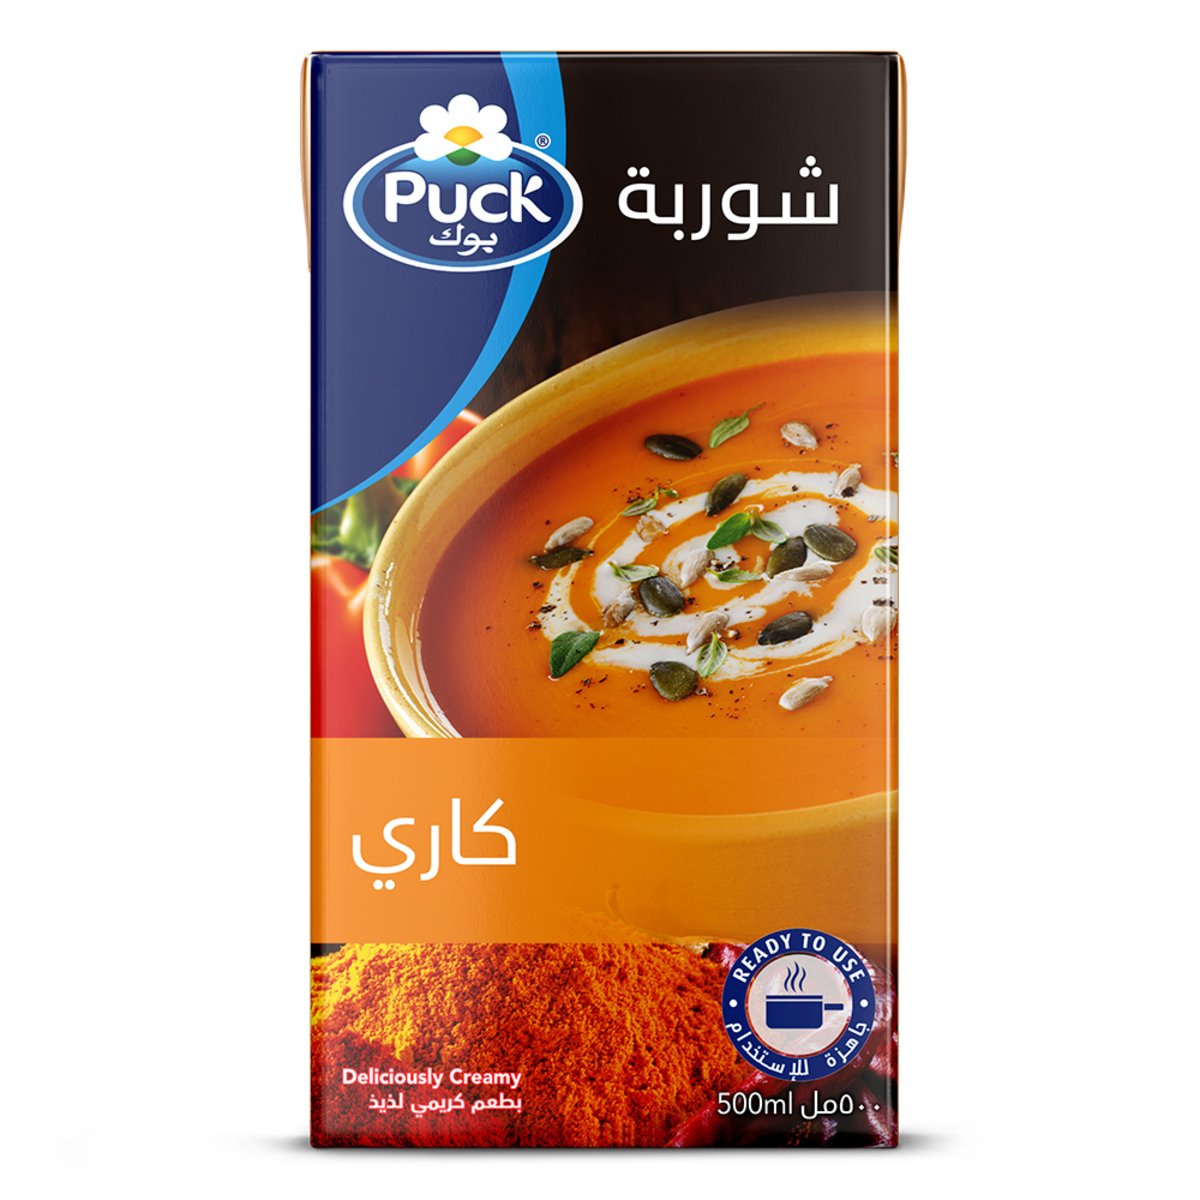 Puck Soup Creamy Curry 500 ml